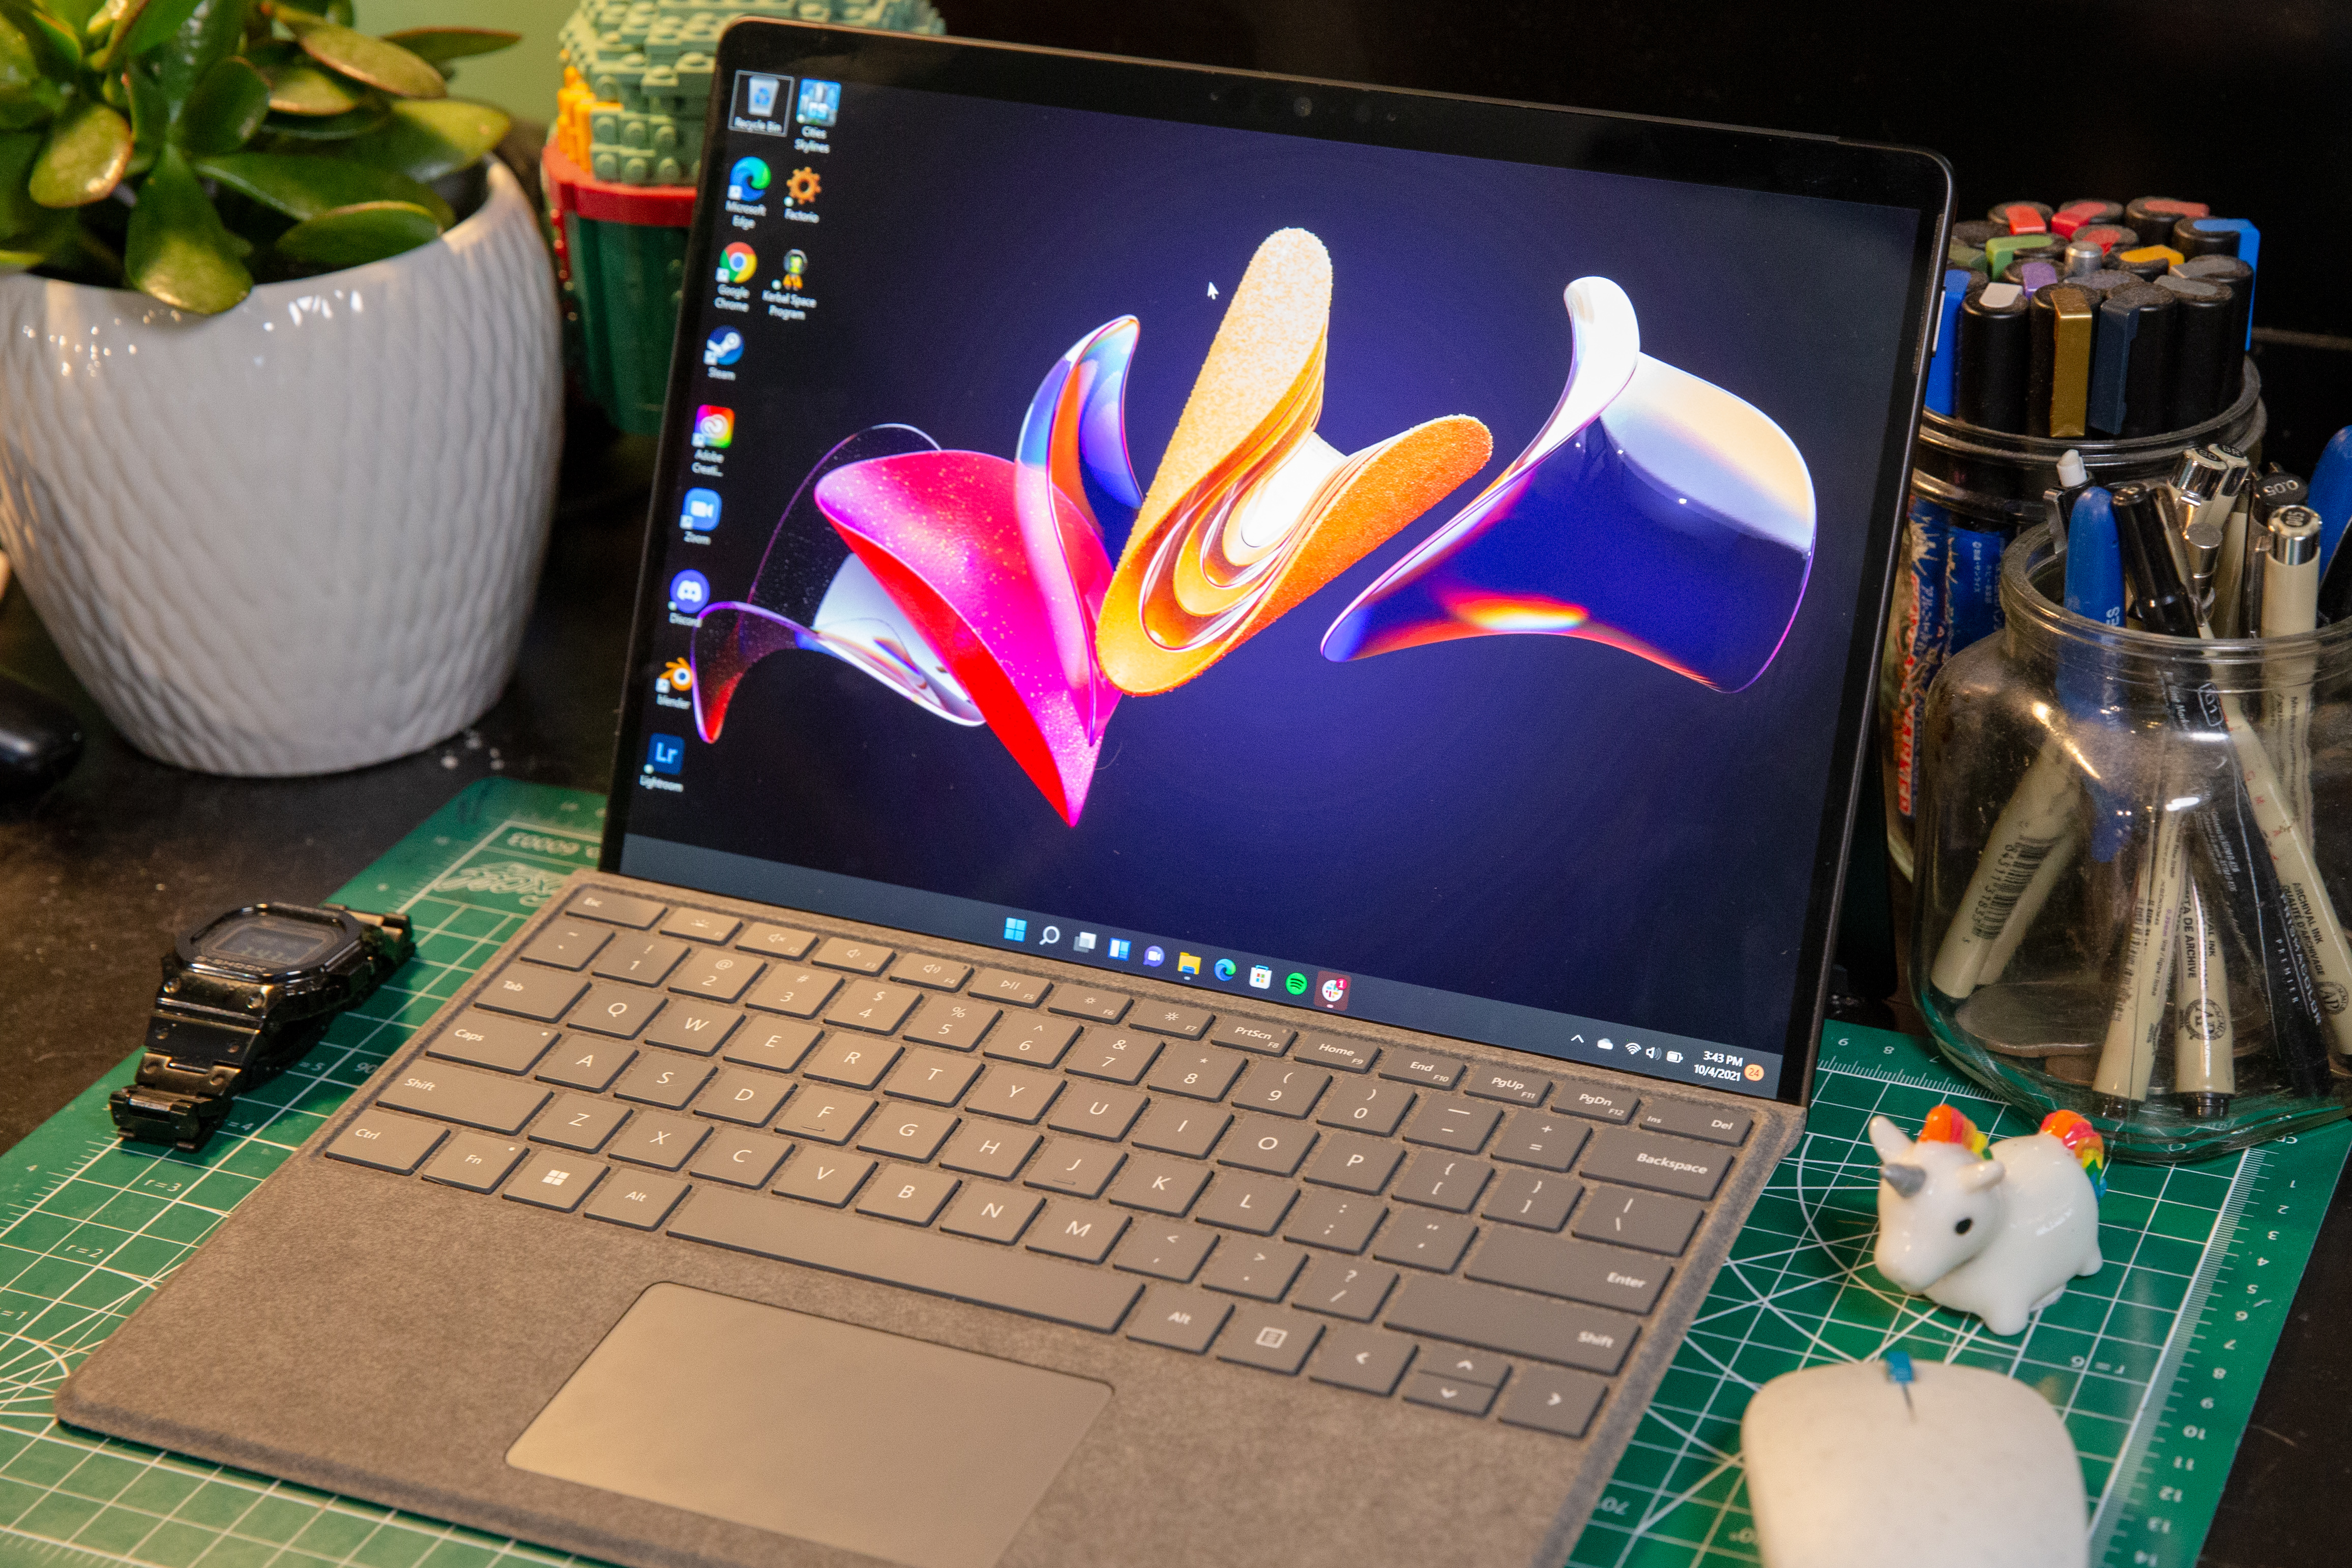 Review: The Surface Pro 8 with Windows 11 is fast and fresh | TechCrunch